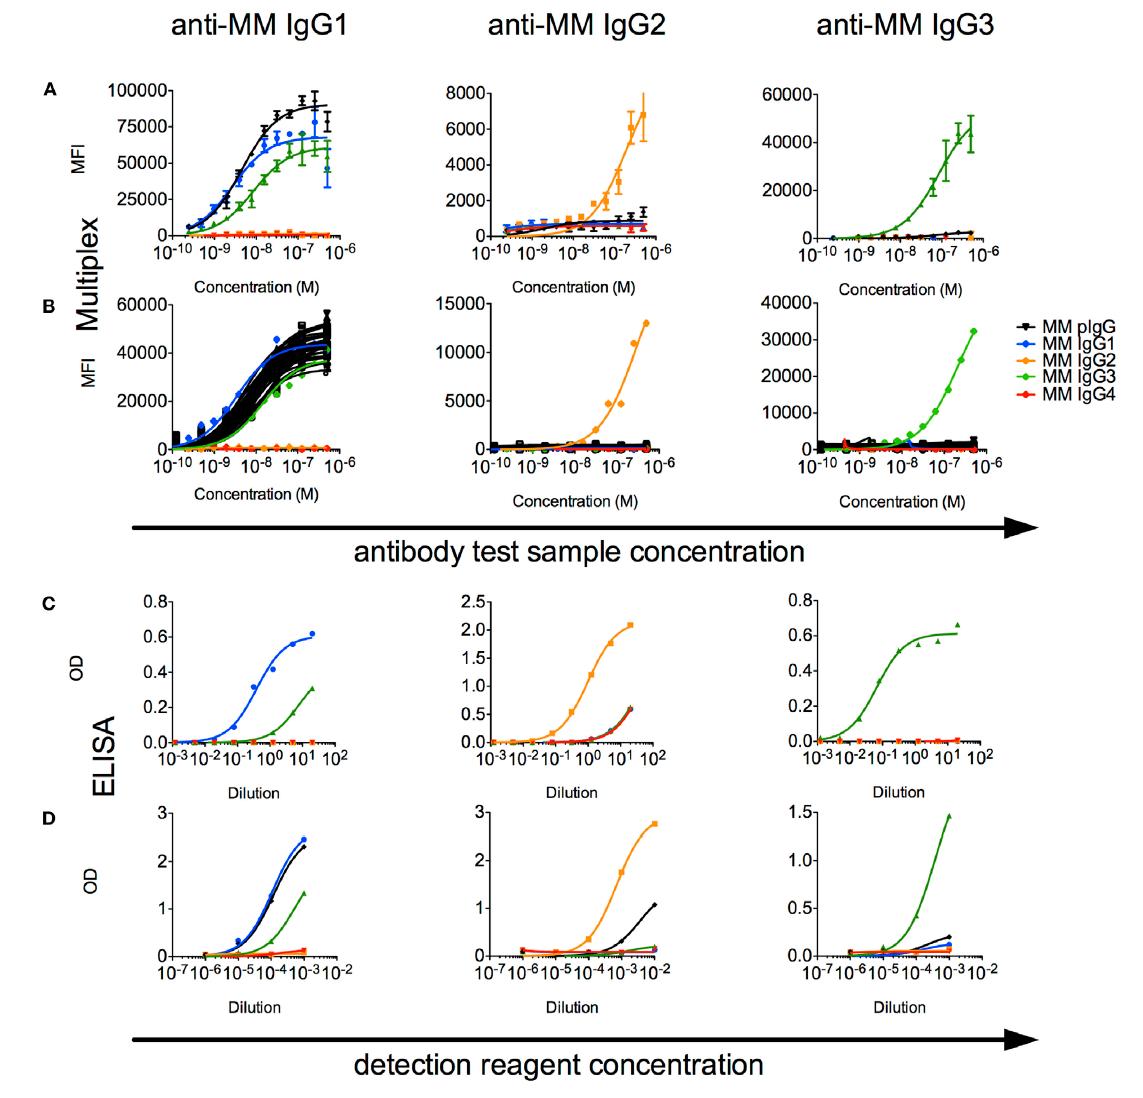 characterization of rhesus immunoglobulin g (igg) subclass composition and detection reagents. (a,B) 